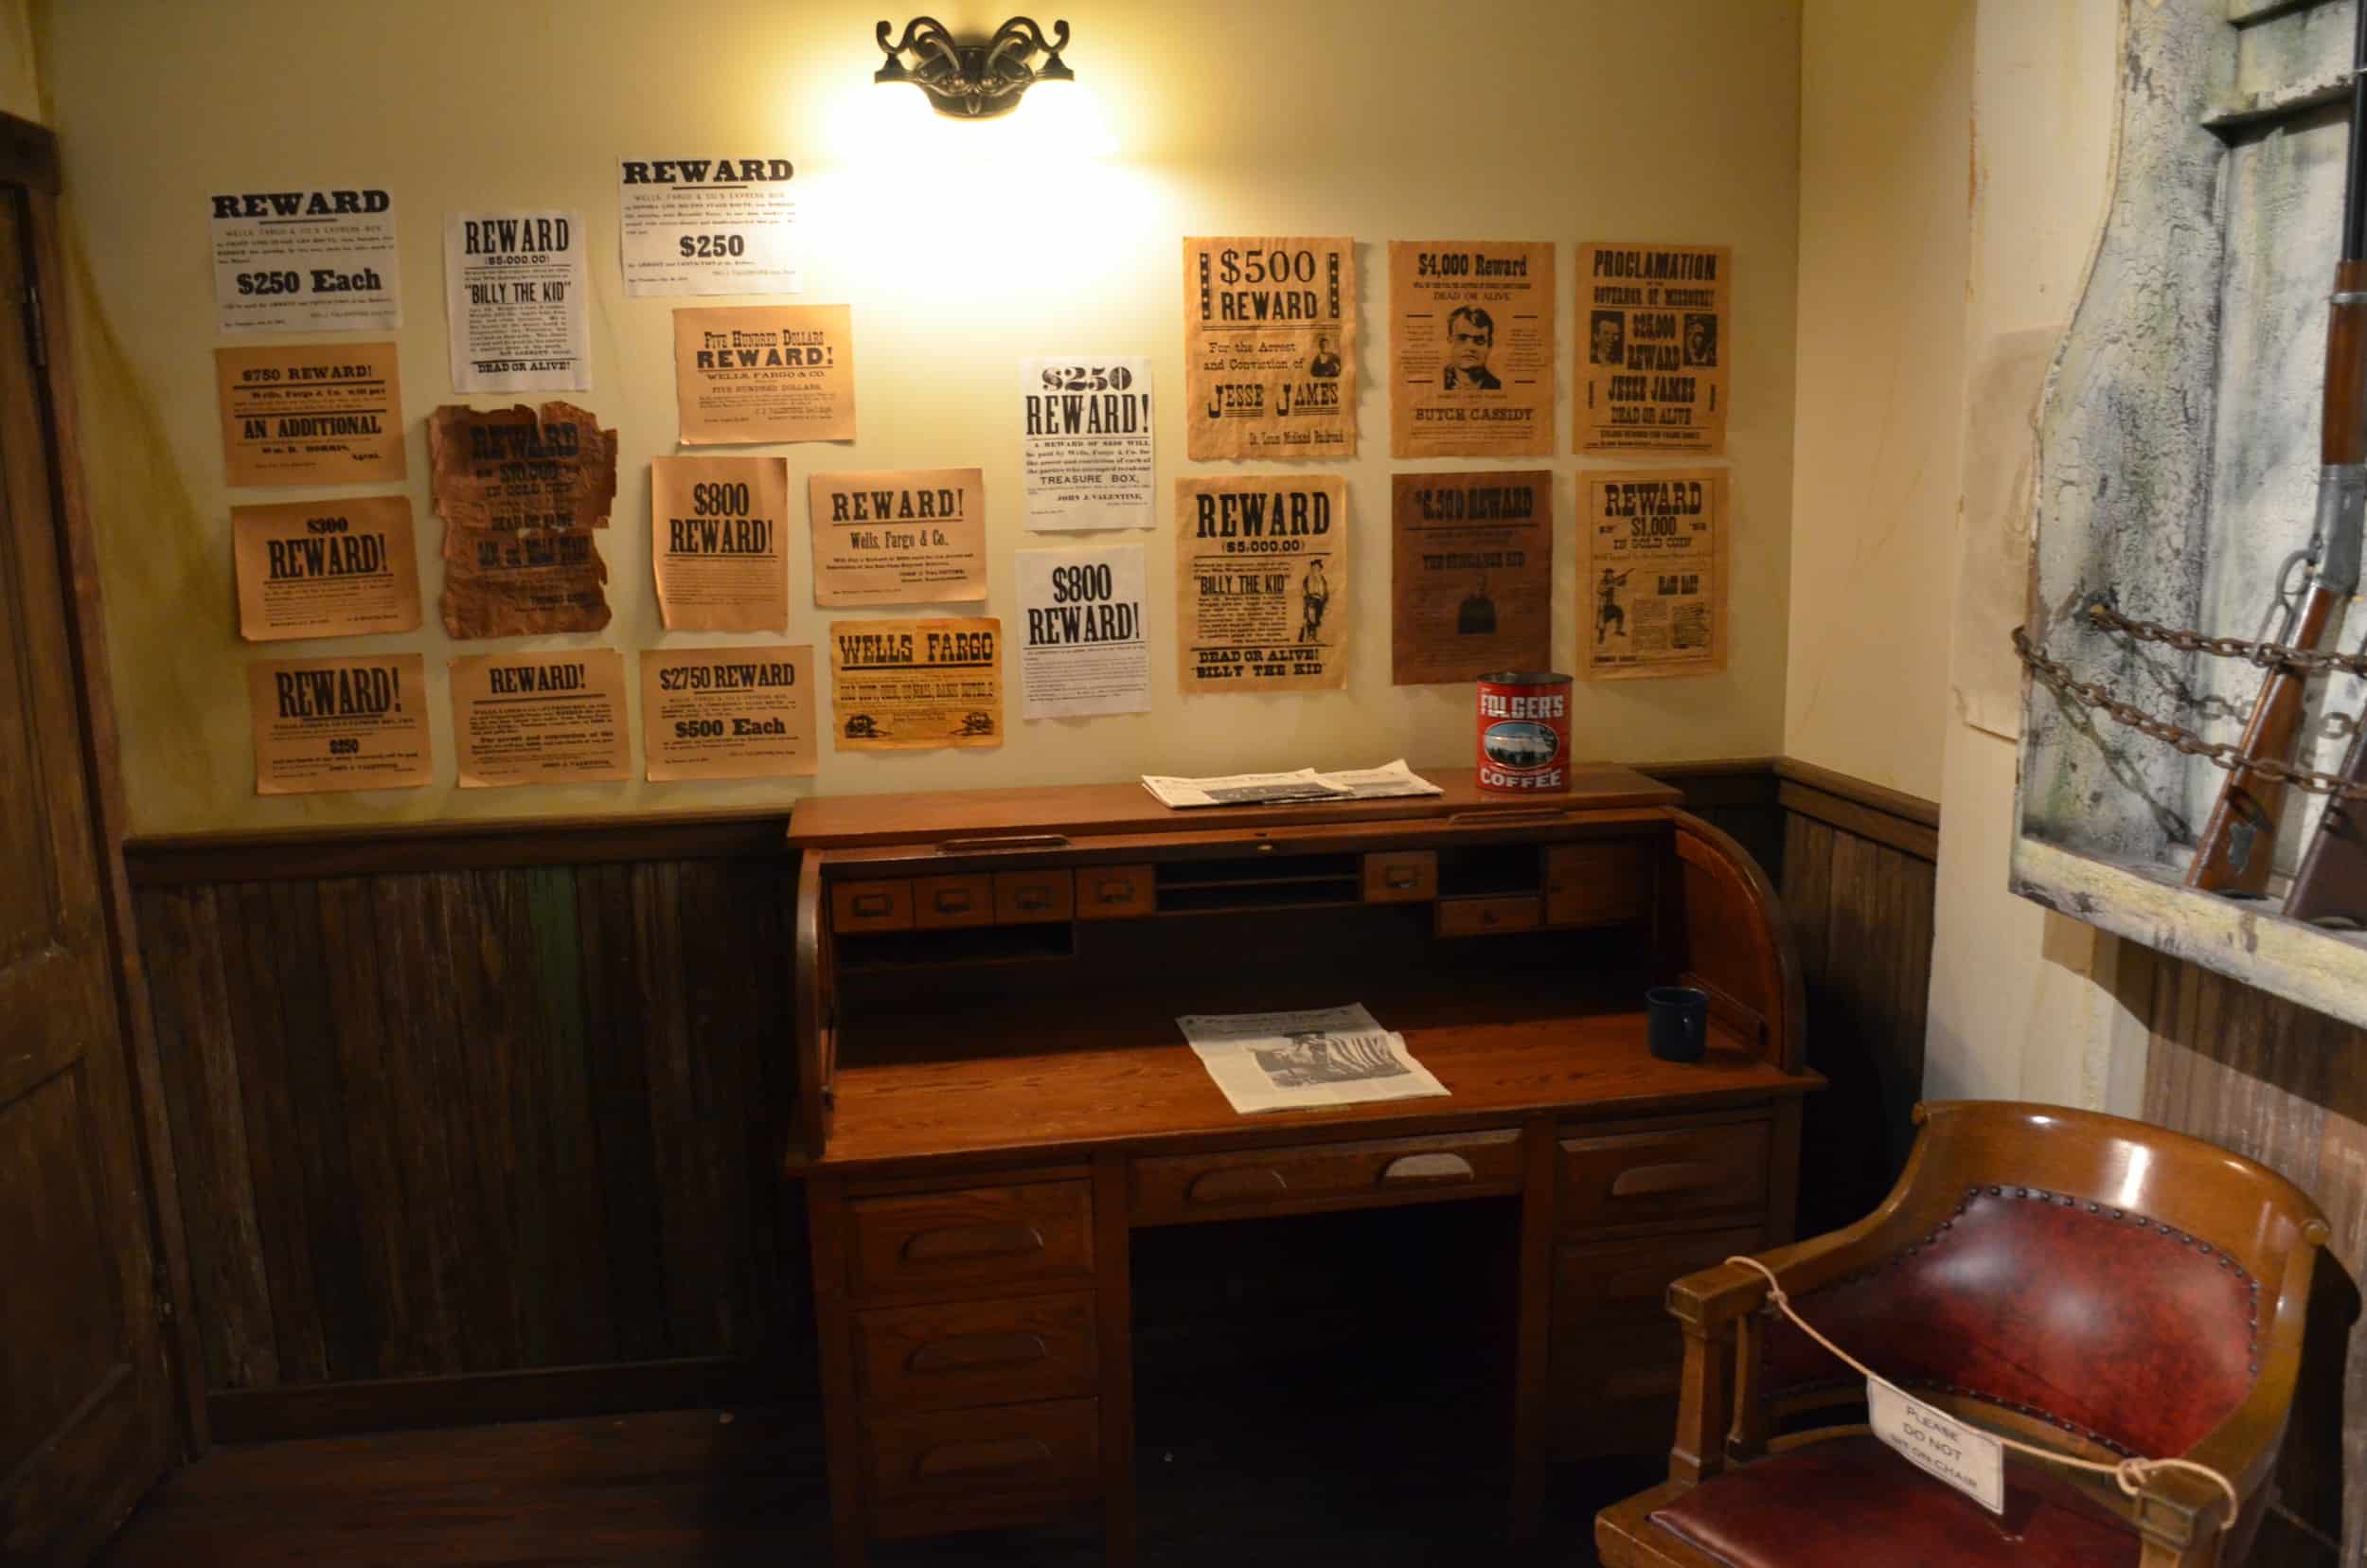 Wanted posters in Ranger Town at the Texas Ranger Museum in San Antonio, Texas